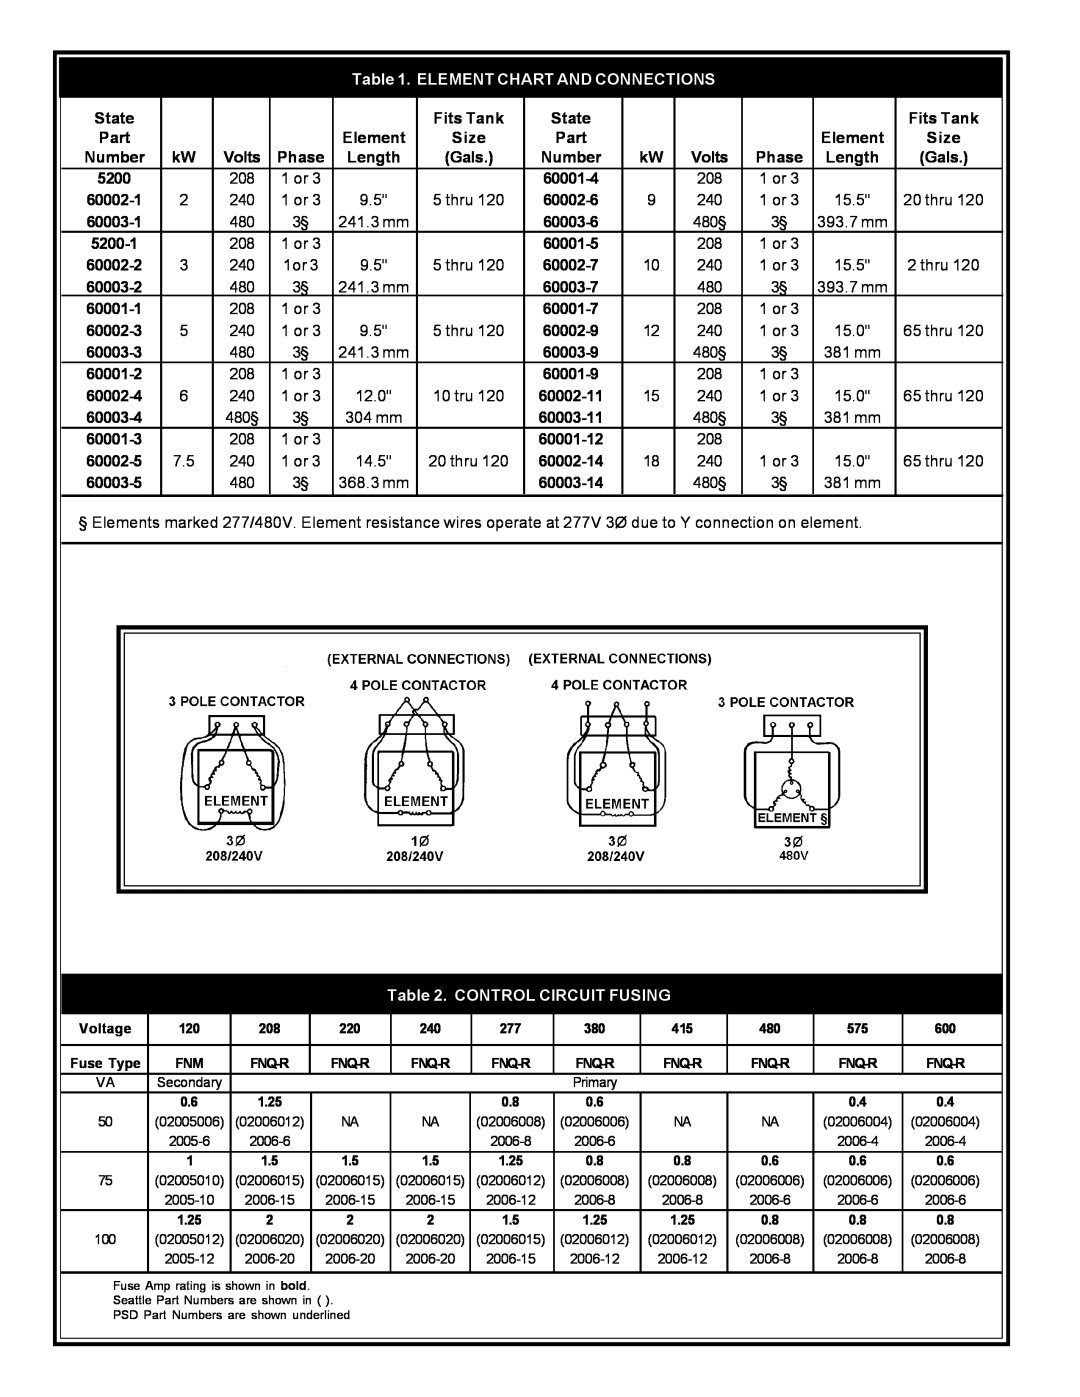 State Industries 5 THRU 120 manual Element Chart And Connections, Control Circuit Fusing 